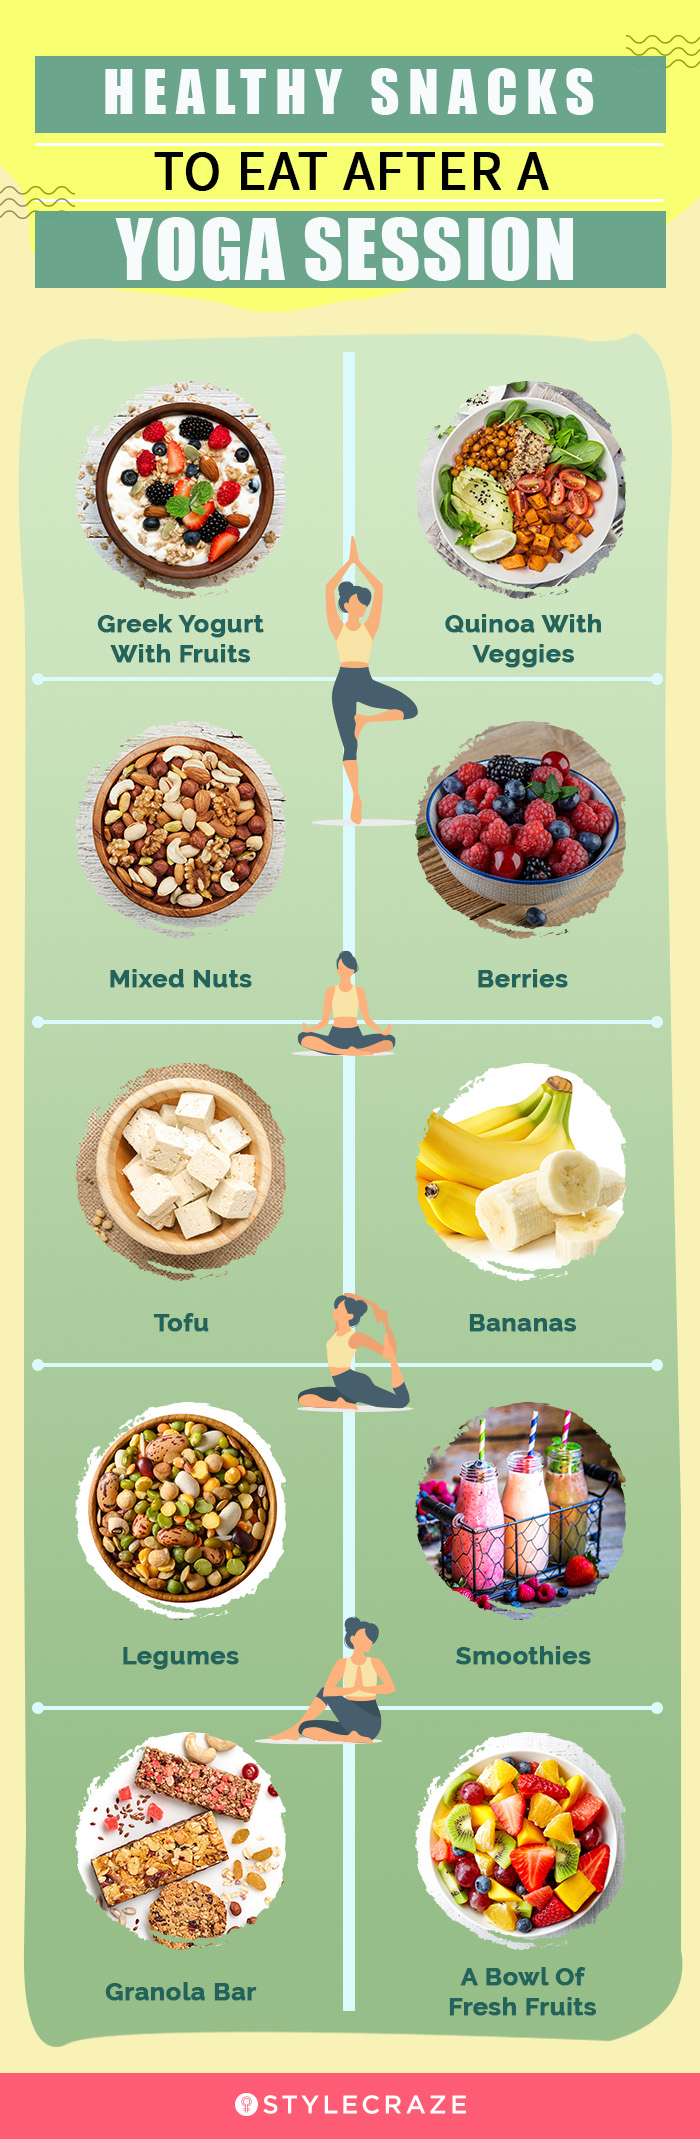 healthy snacks to eat after a yoga session (infographic)